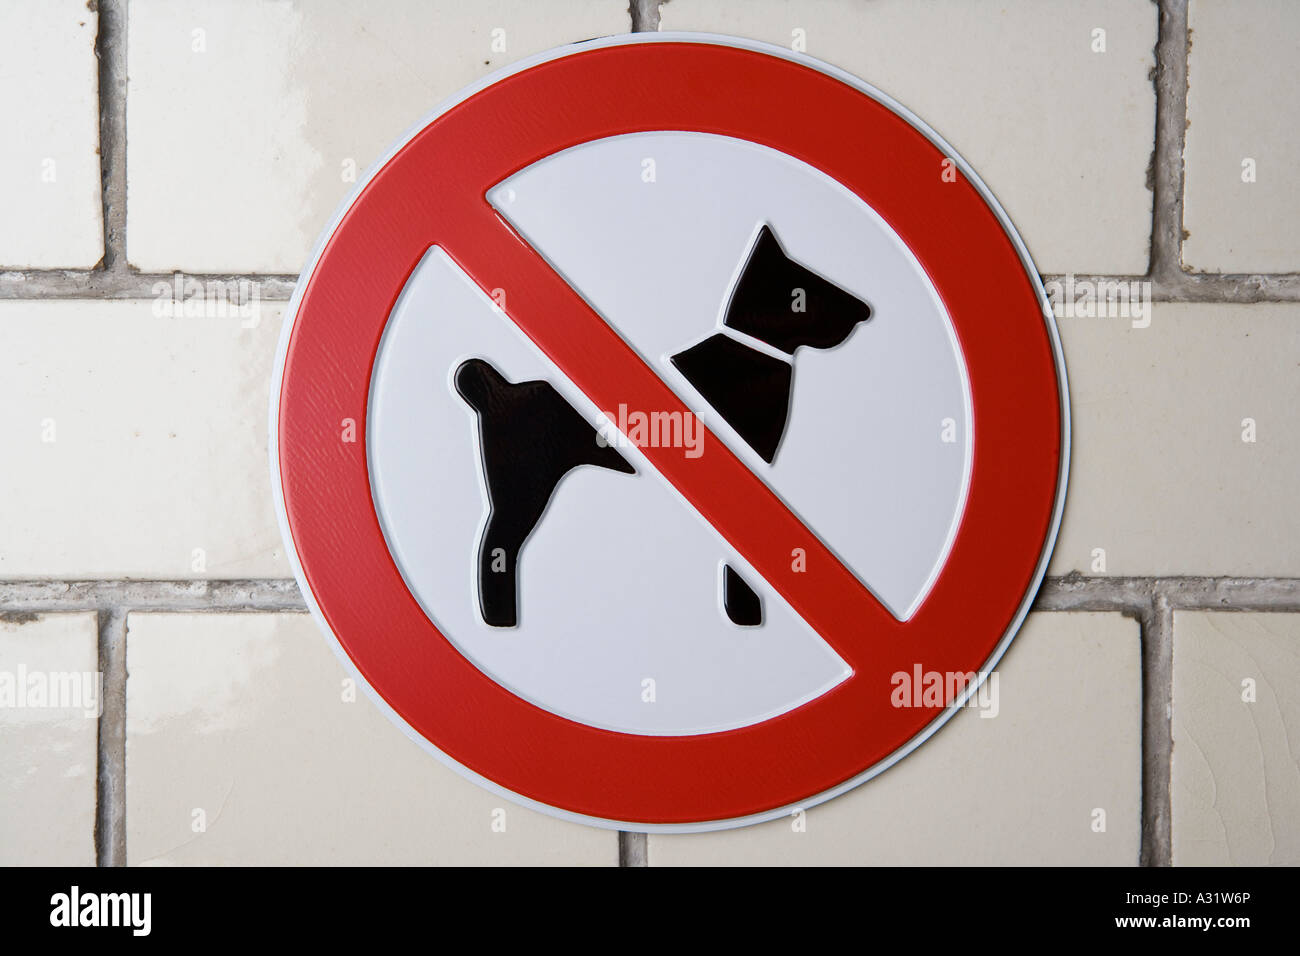 No dogs allowed sign Stock Photo